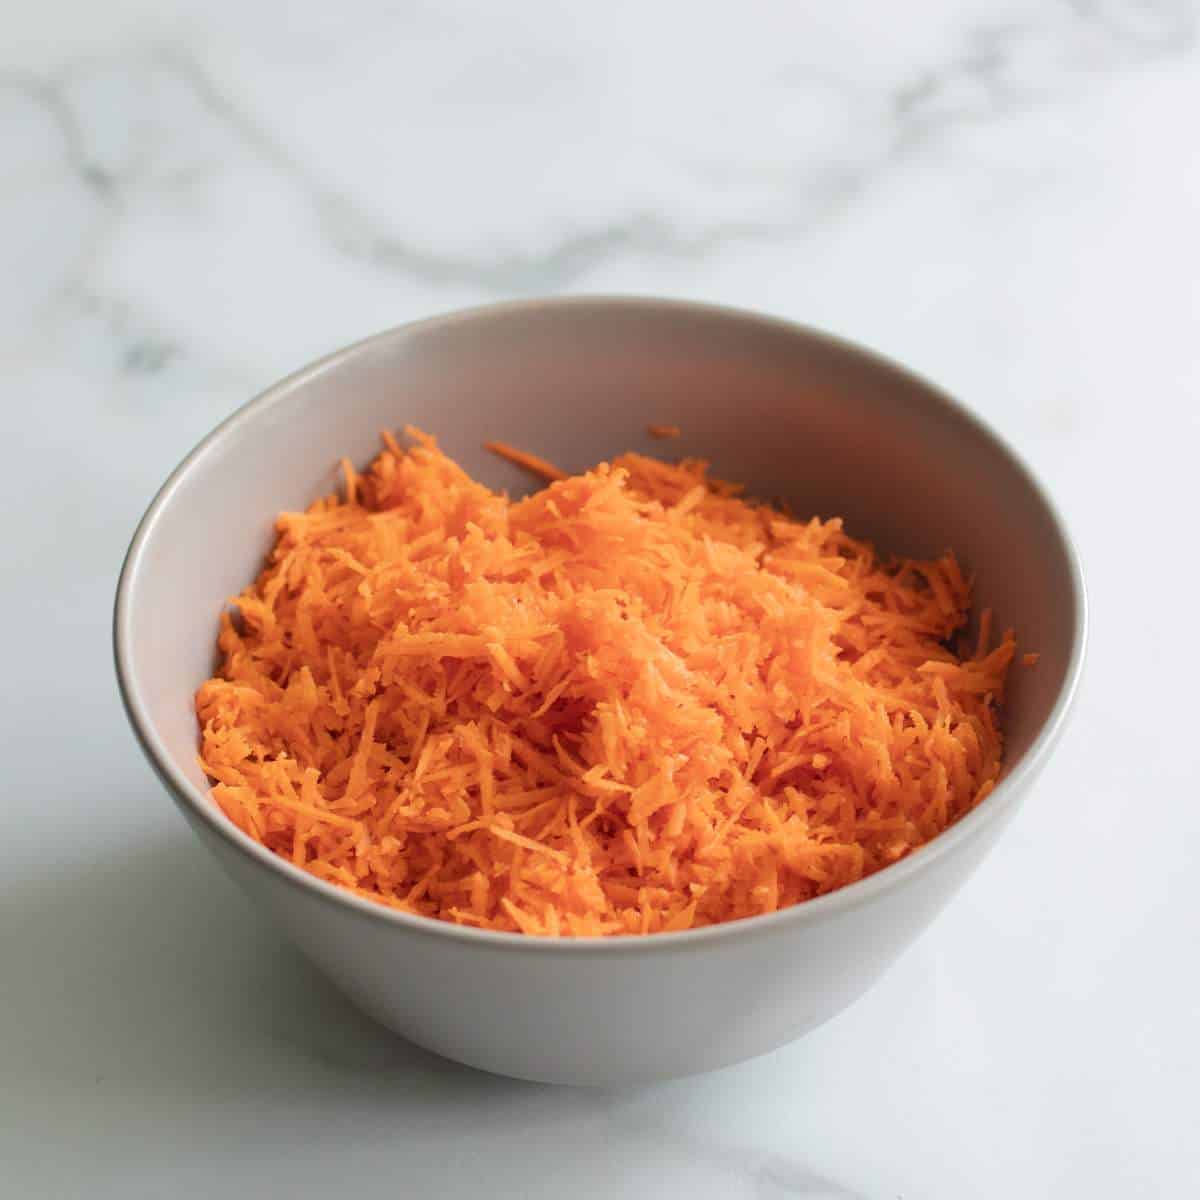 Grated carrot in a bowl.